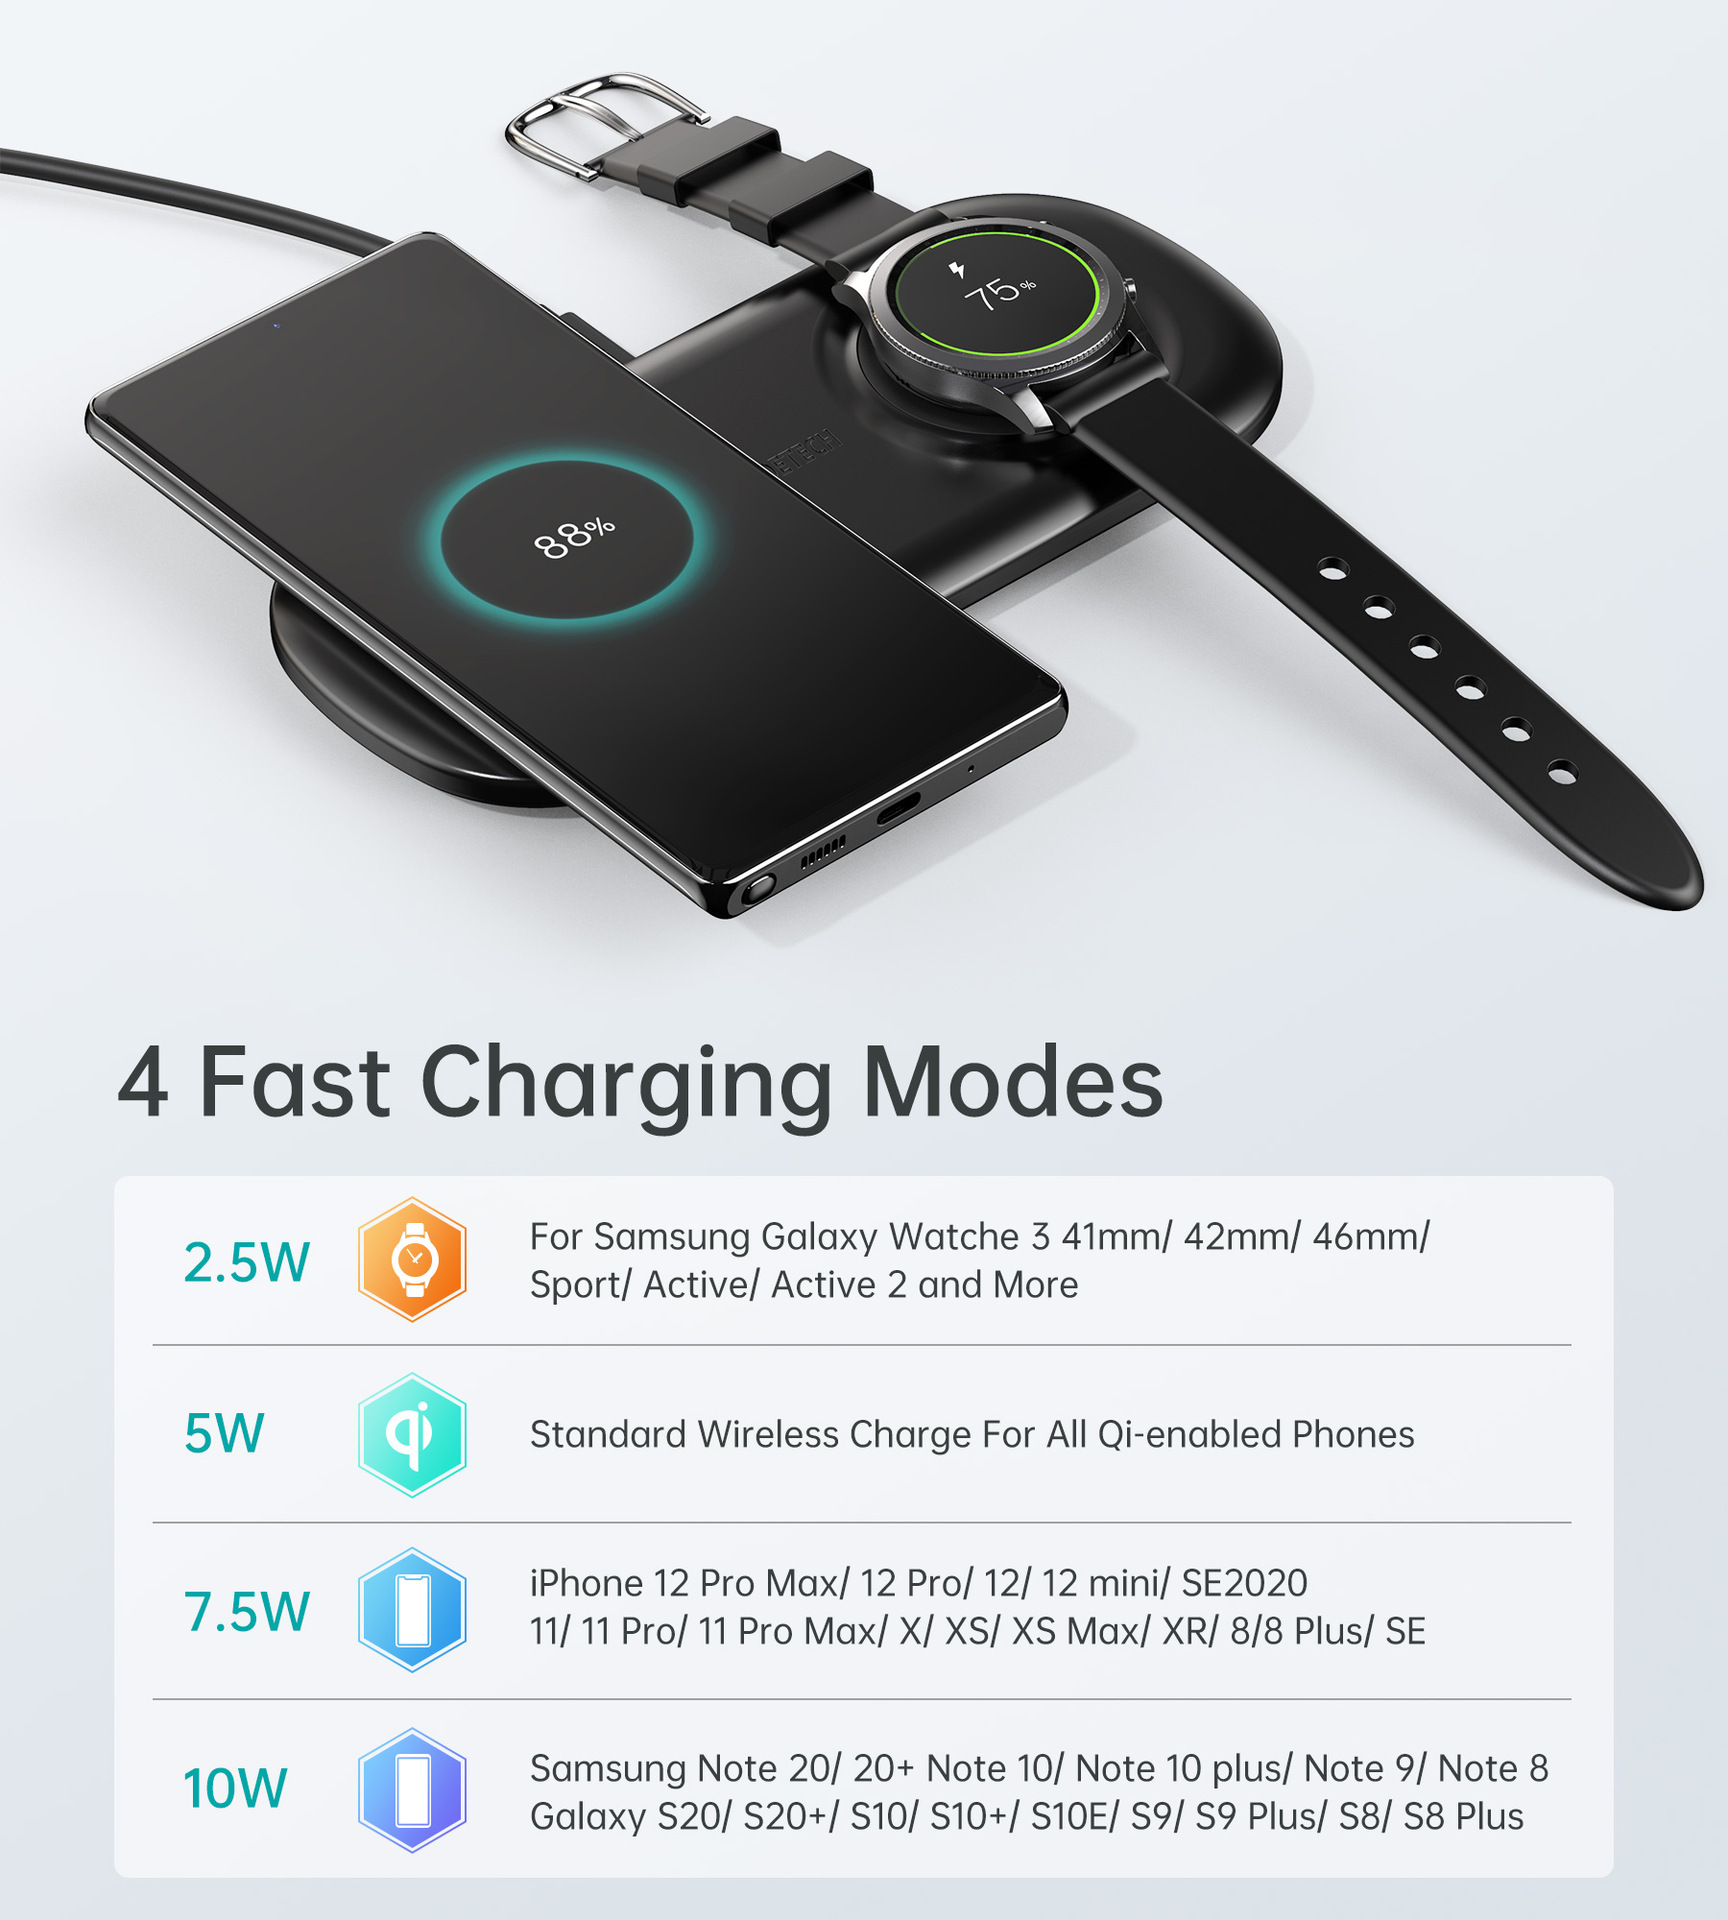 CHOETECH-10W-75W-5W-Wireless-Charger-Fast-Wireless-Charging-Pad-For-Qi-enabled-Smart-Phones-for-iPho-1925345-2